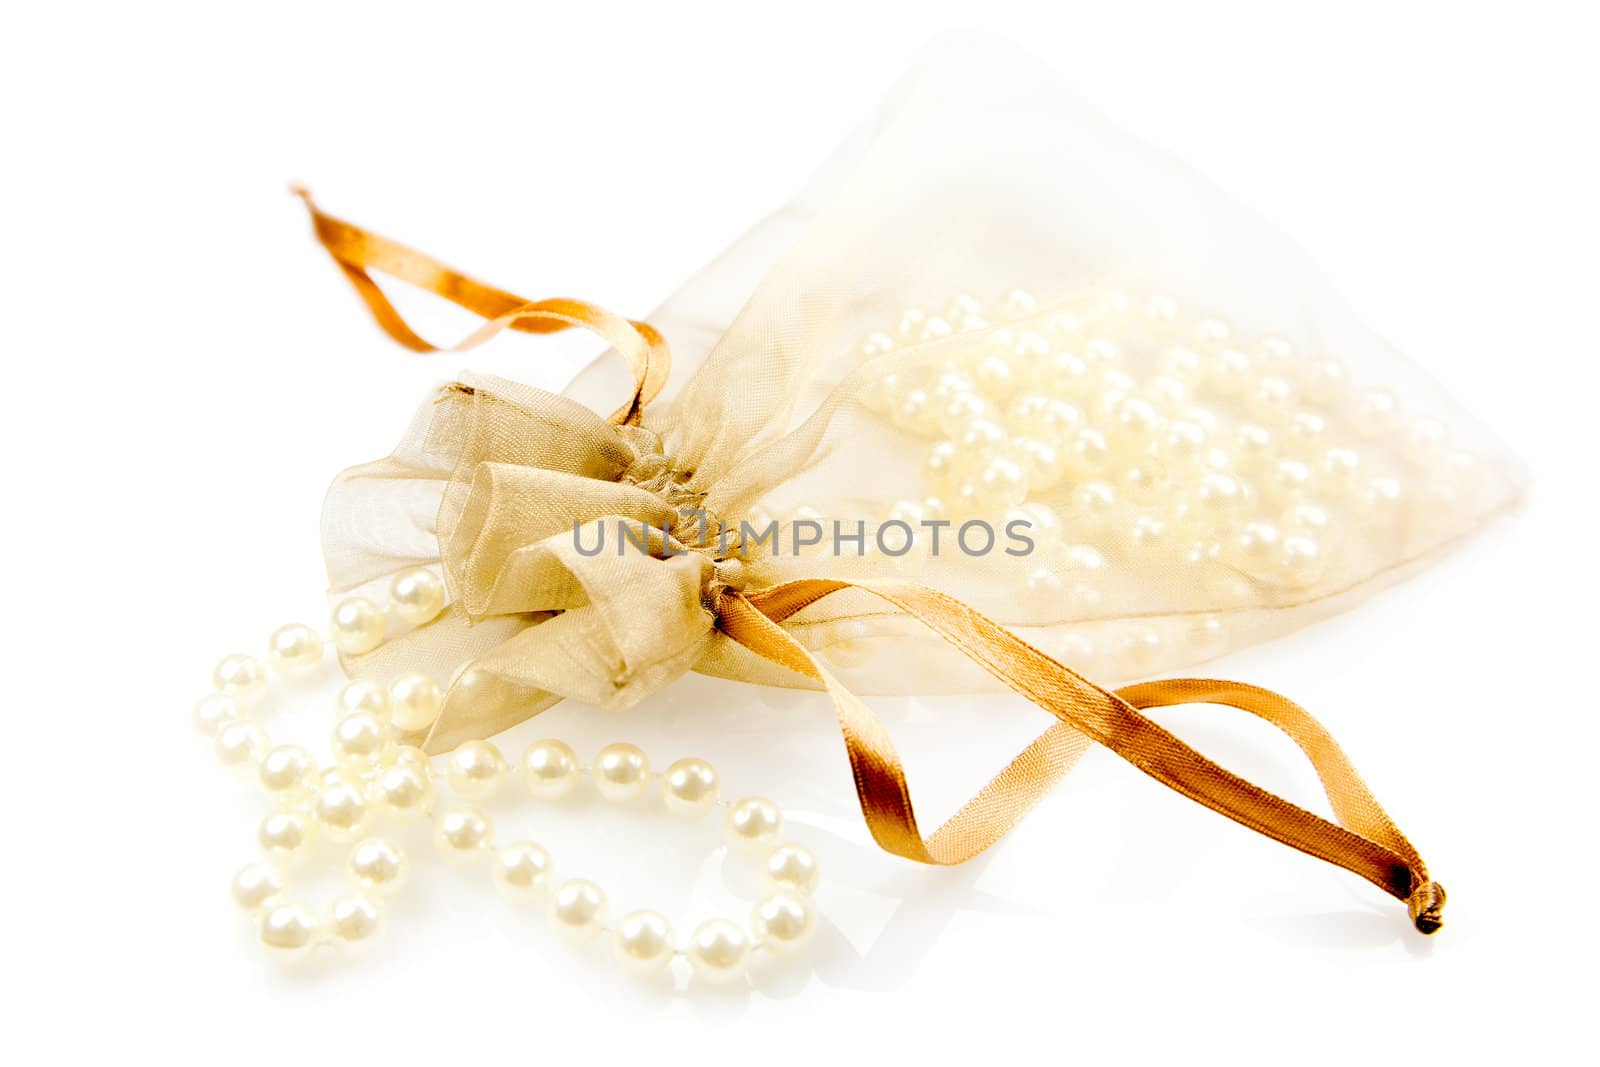 White pearls in a bag, isolated on white background.